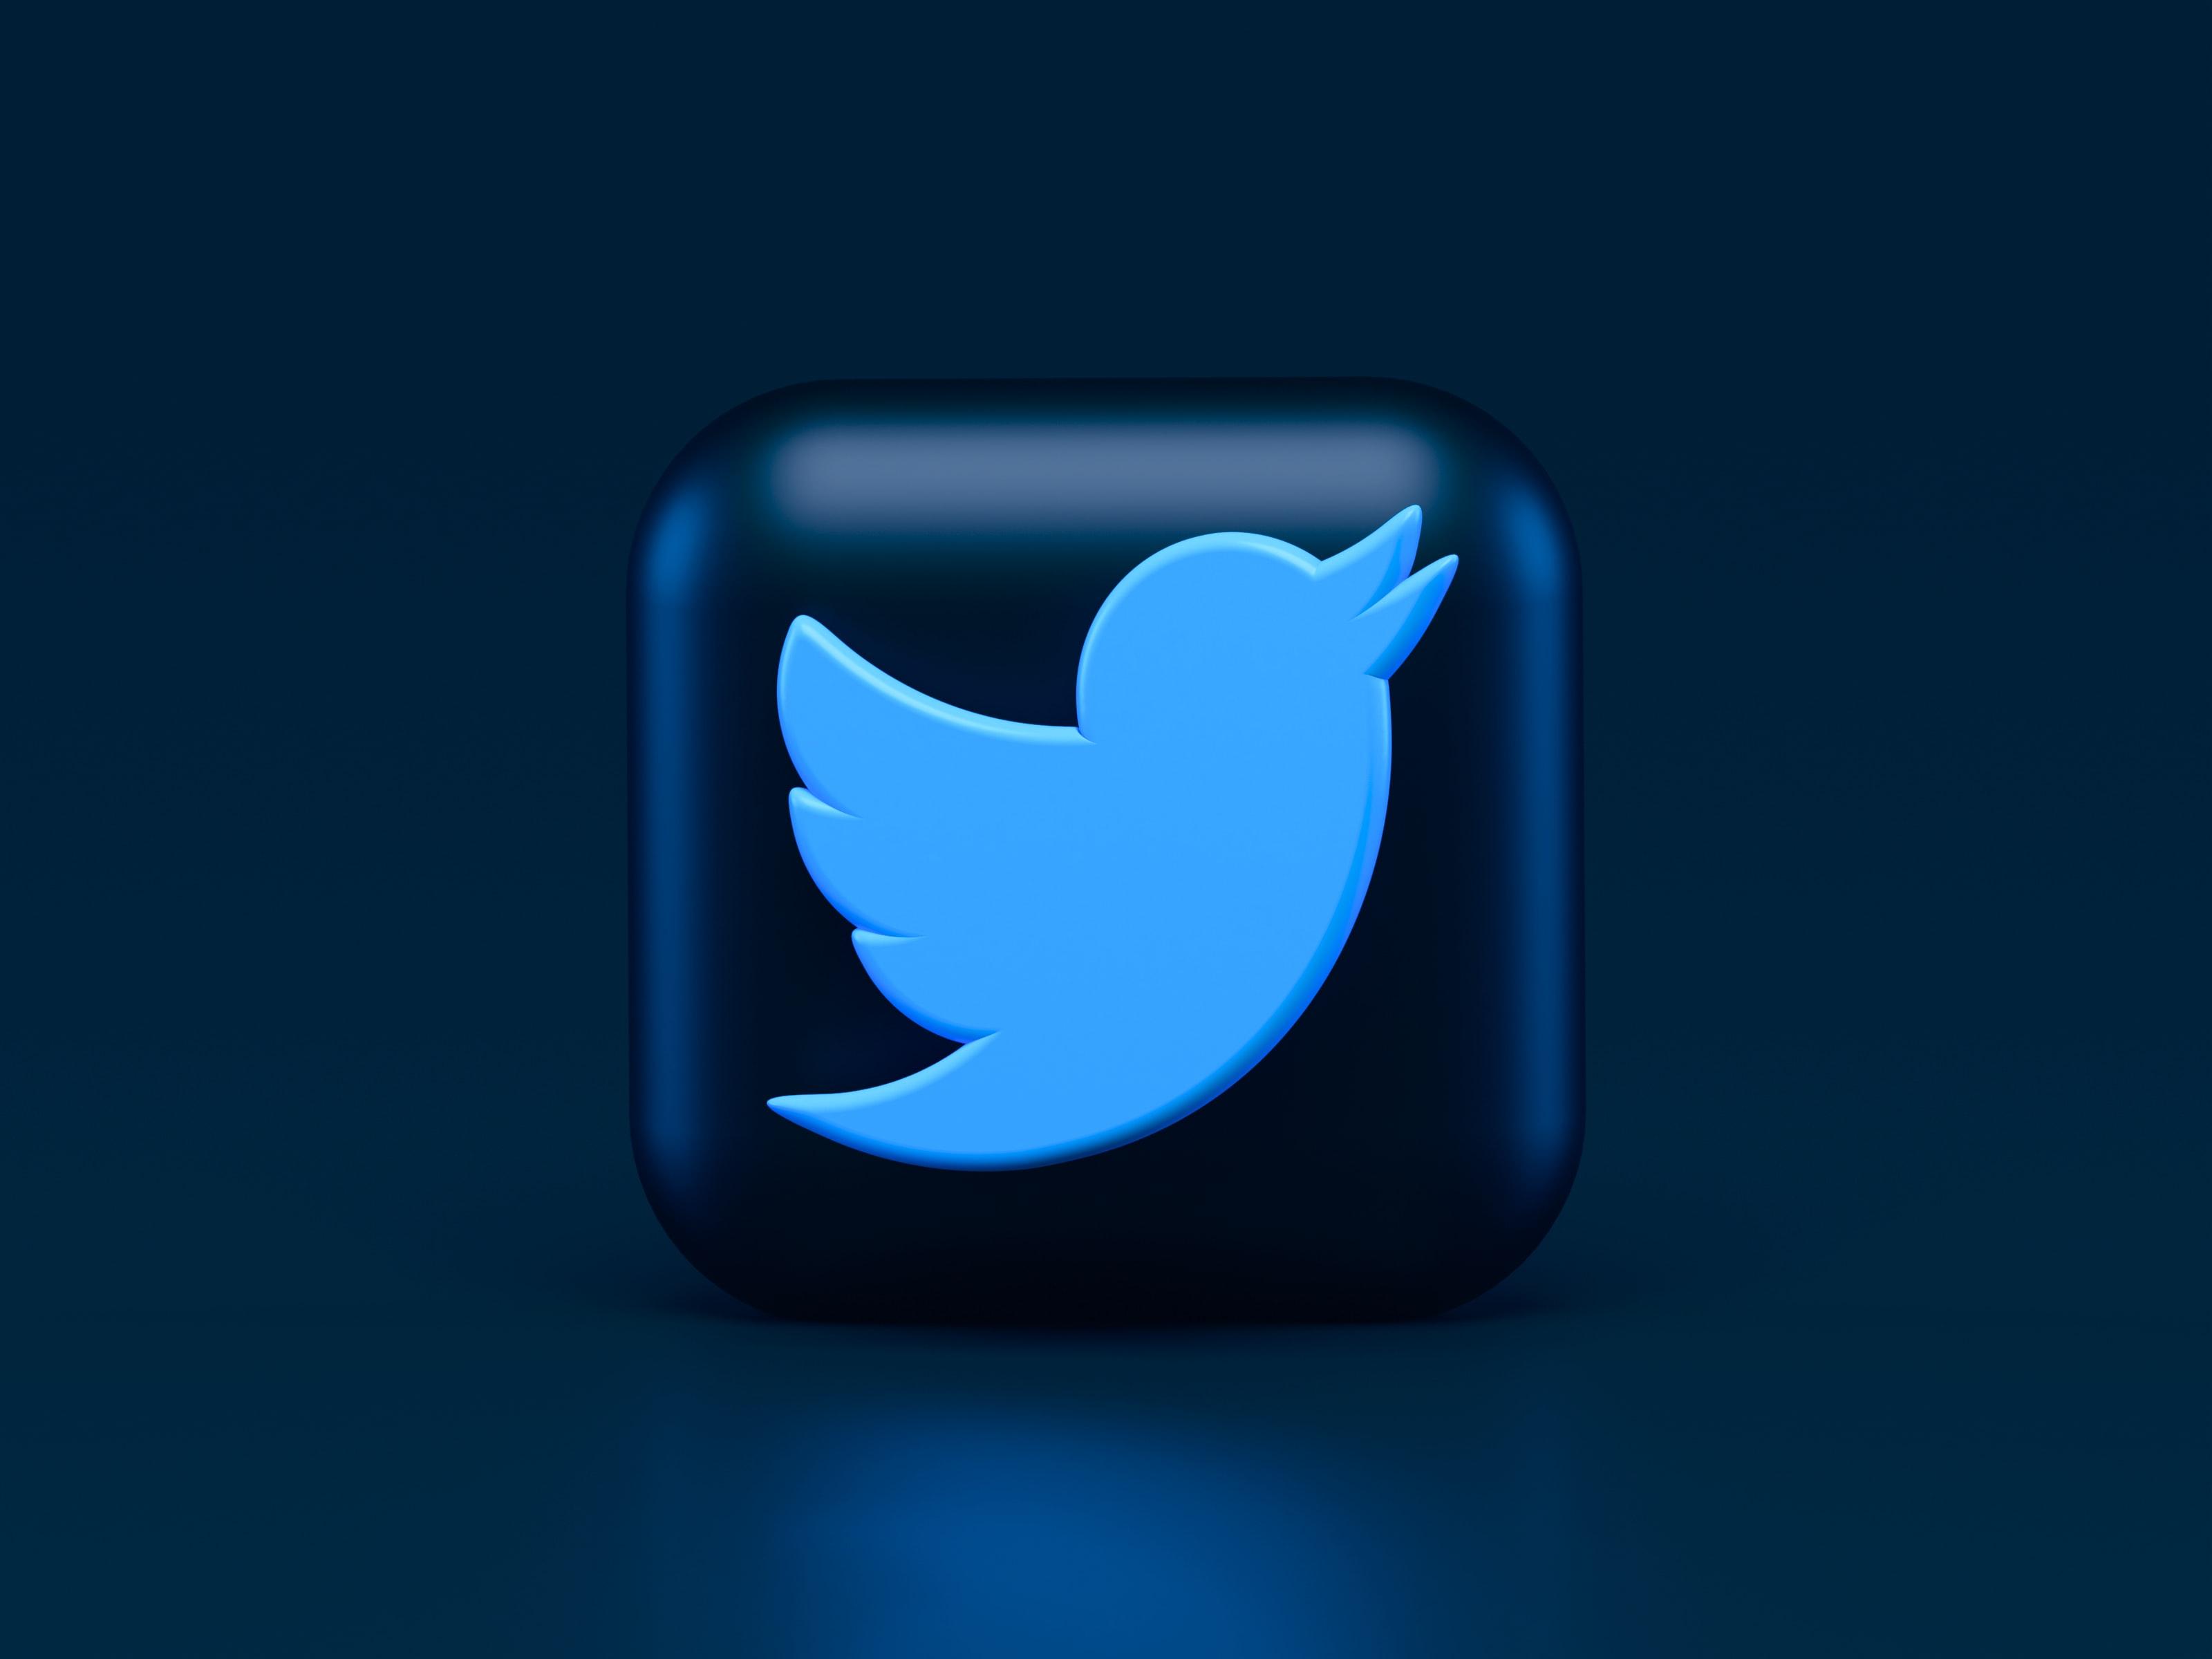 The logo of Twitter on a blue background